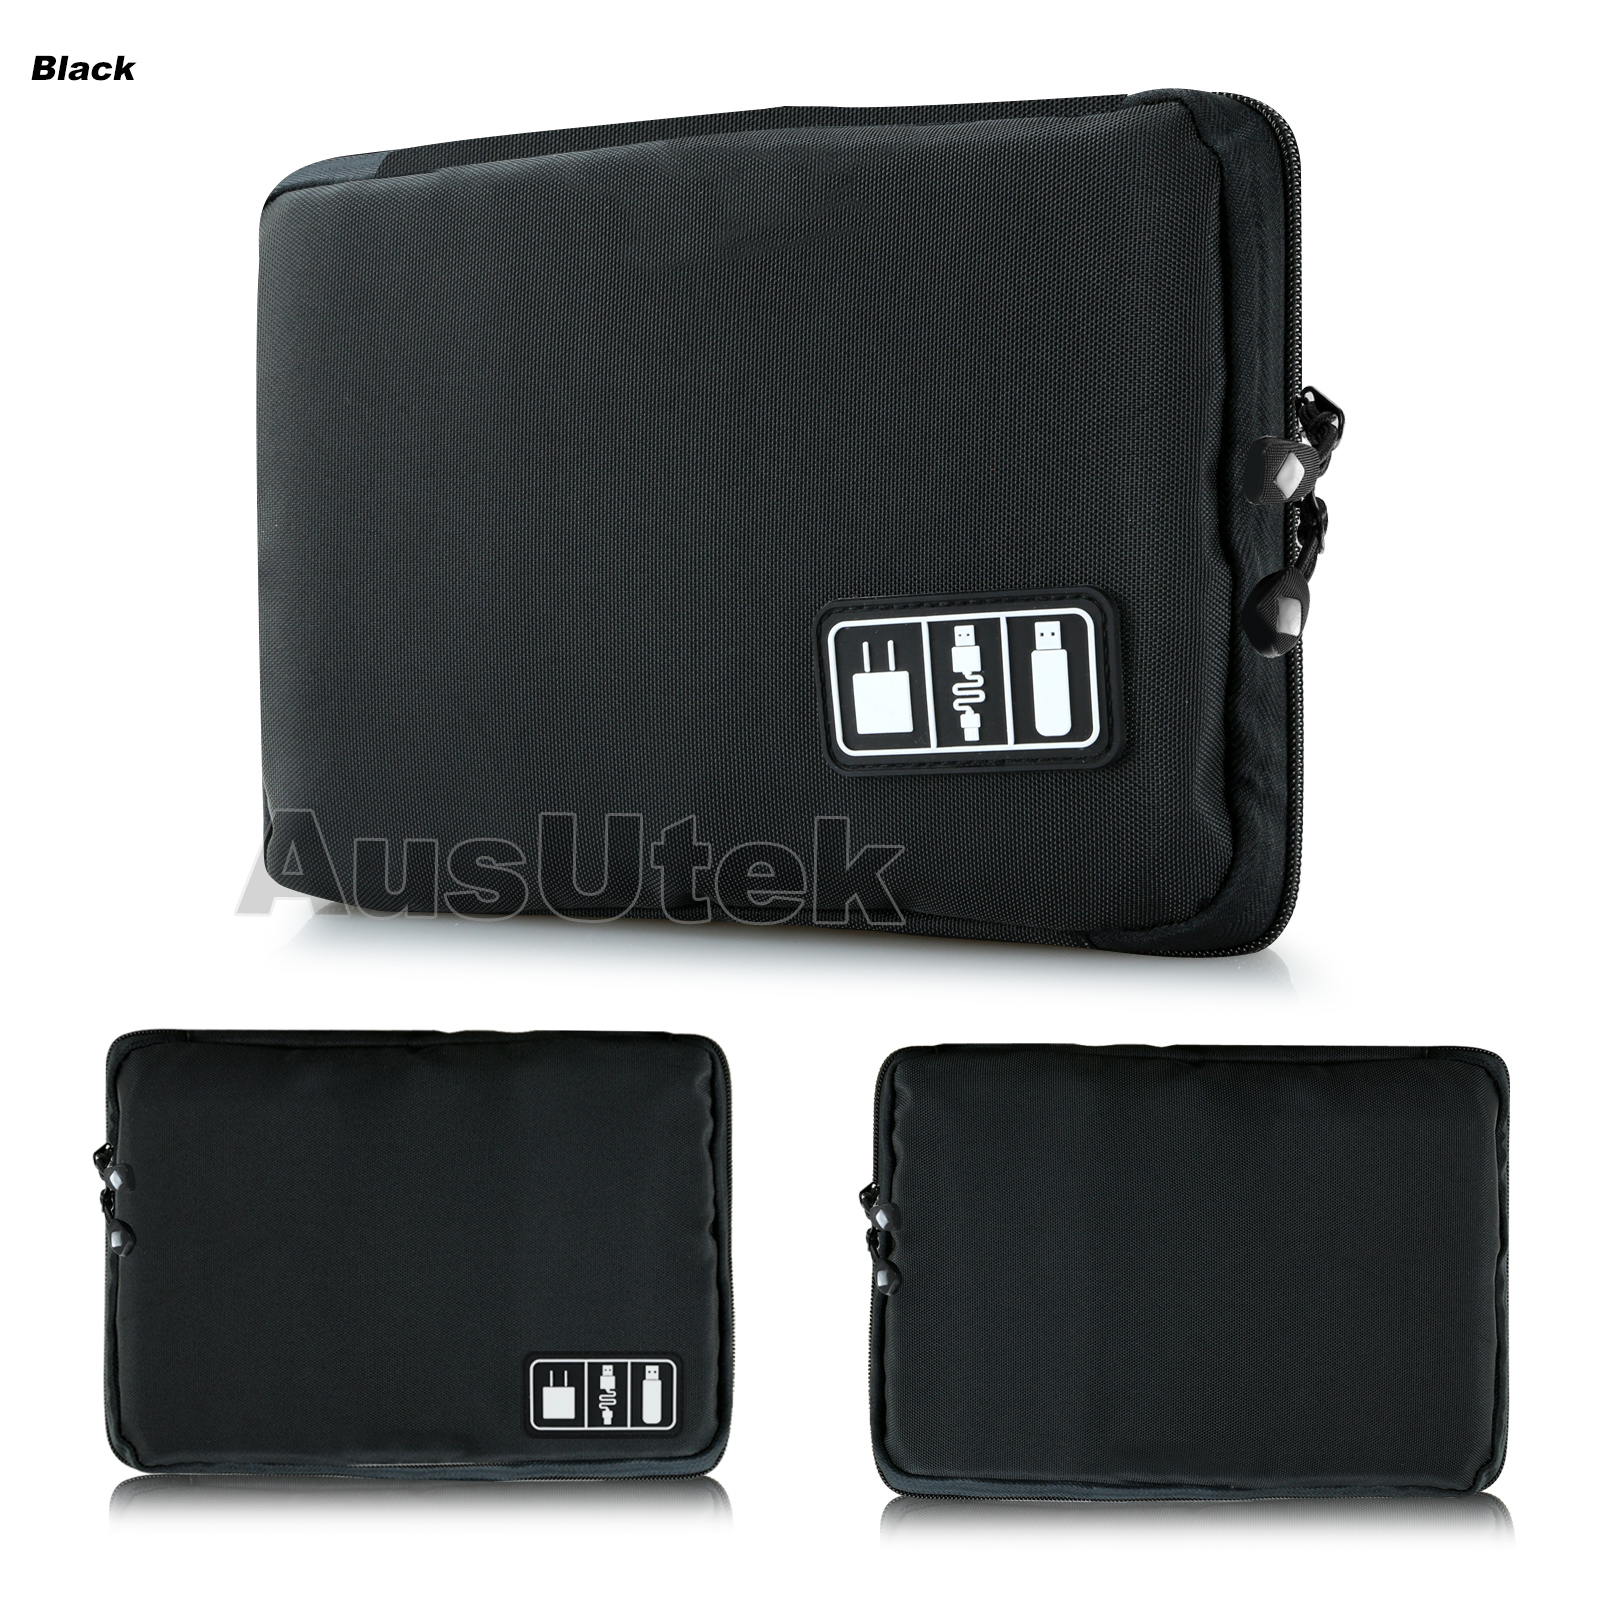 Electronic Accessories Storage USB Cable Organizer Bag Case Drive Travel Insert | eBay